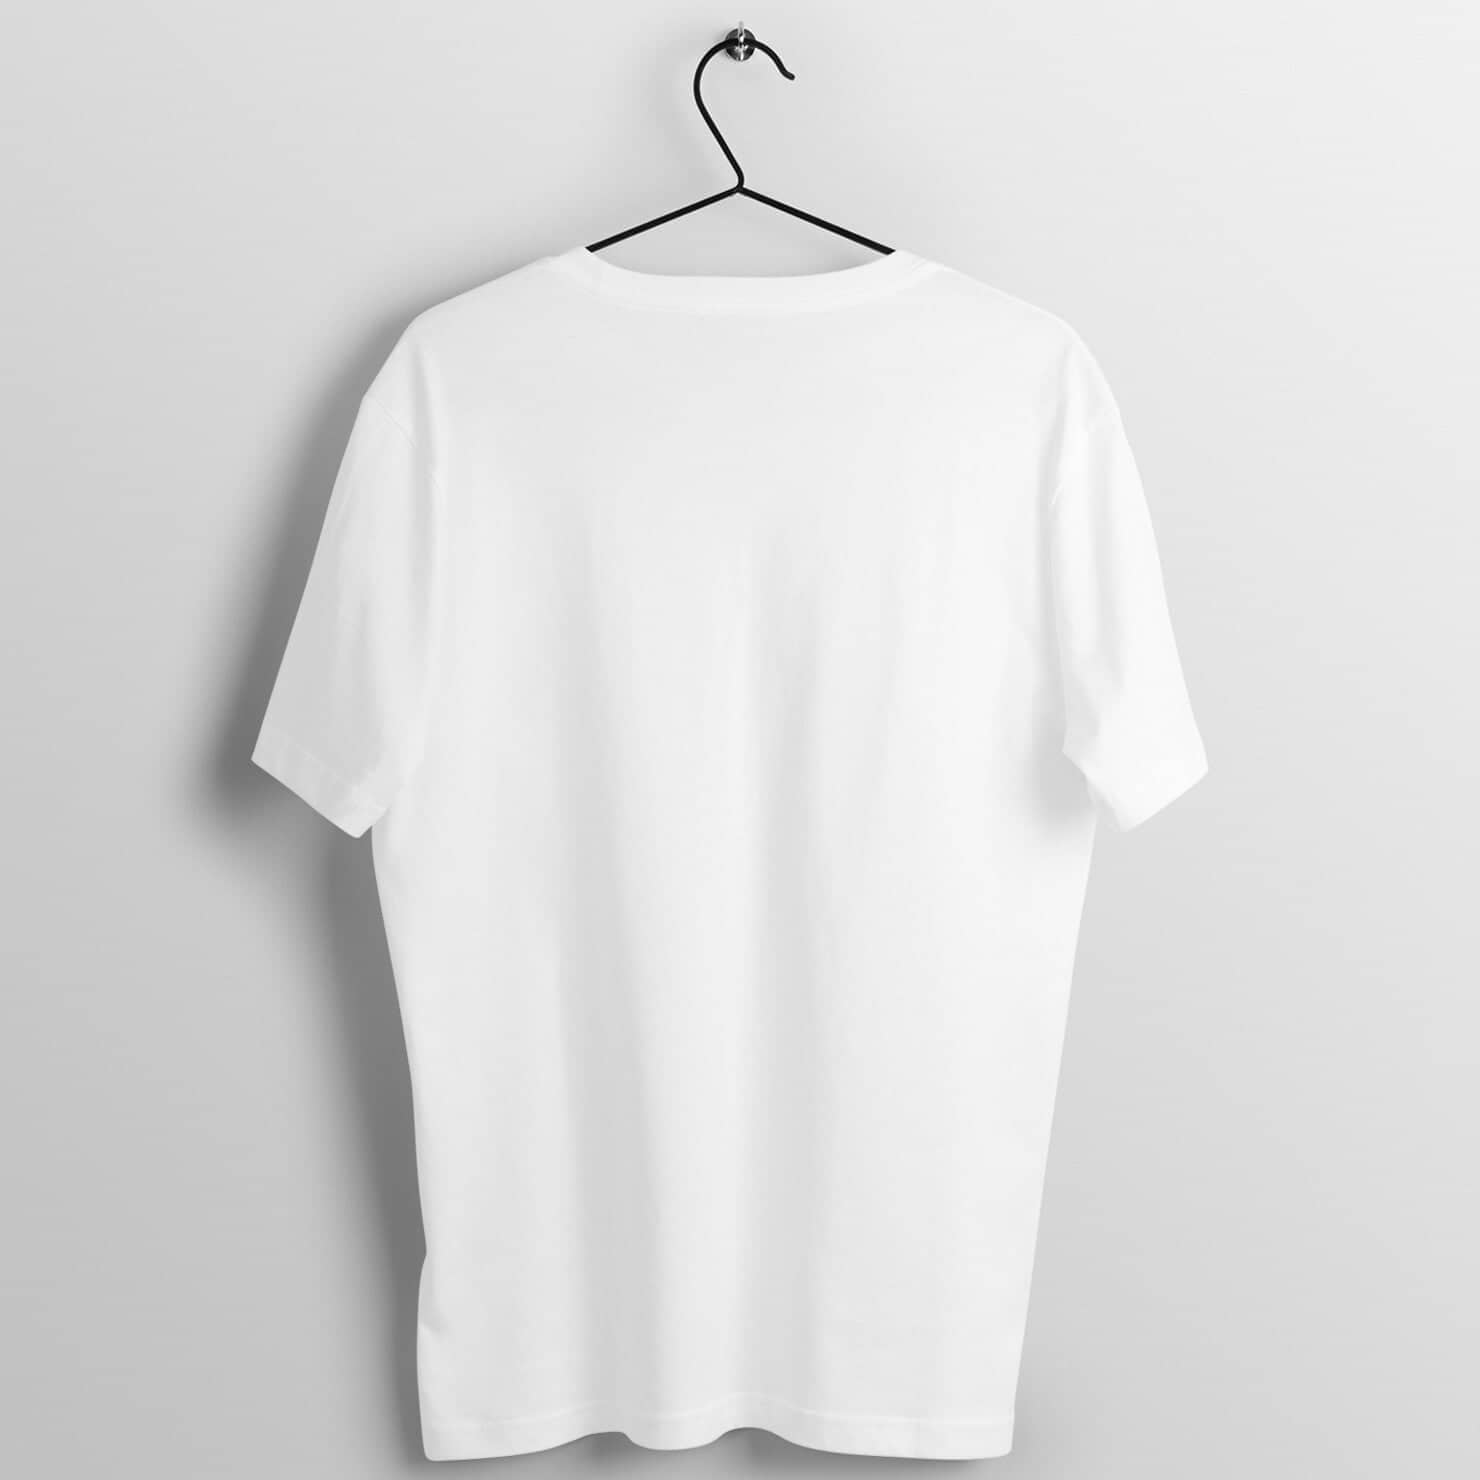 It's a Saturday Night Thing White Party T Shirt for Men and Women Shirts & Tops Printrove 